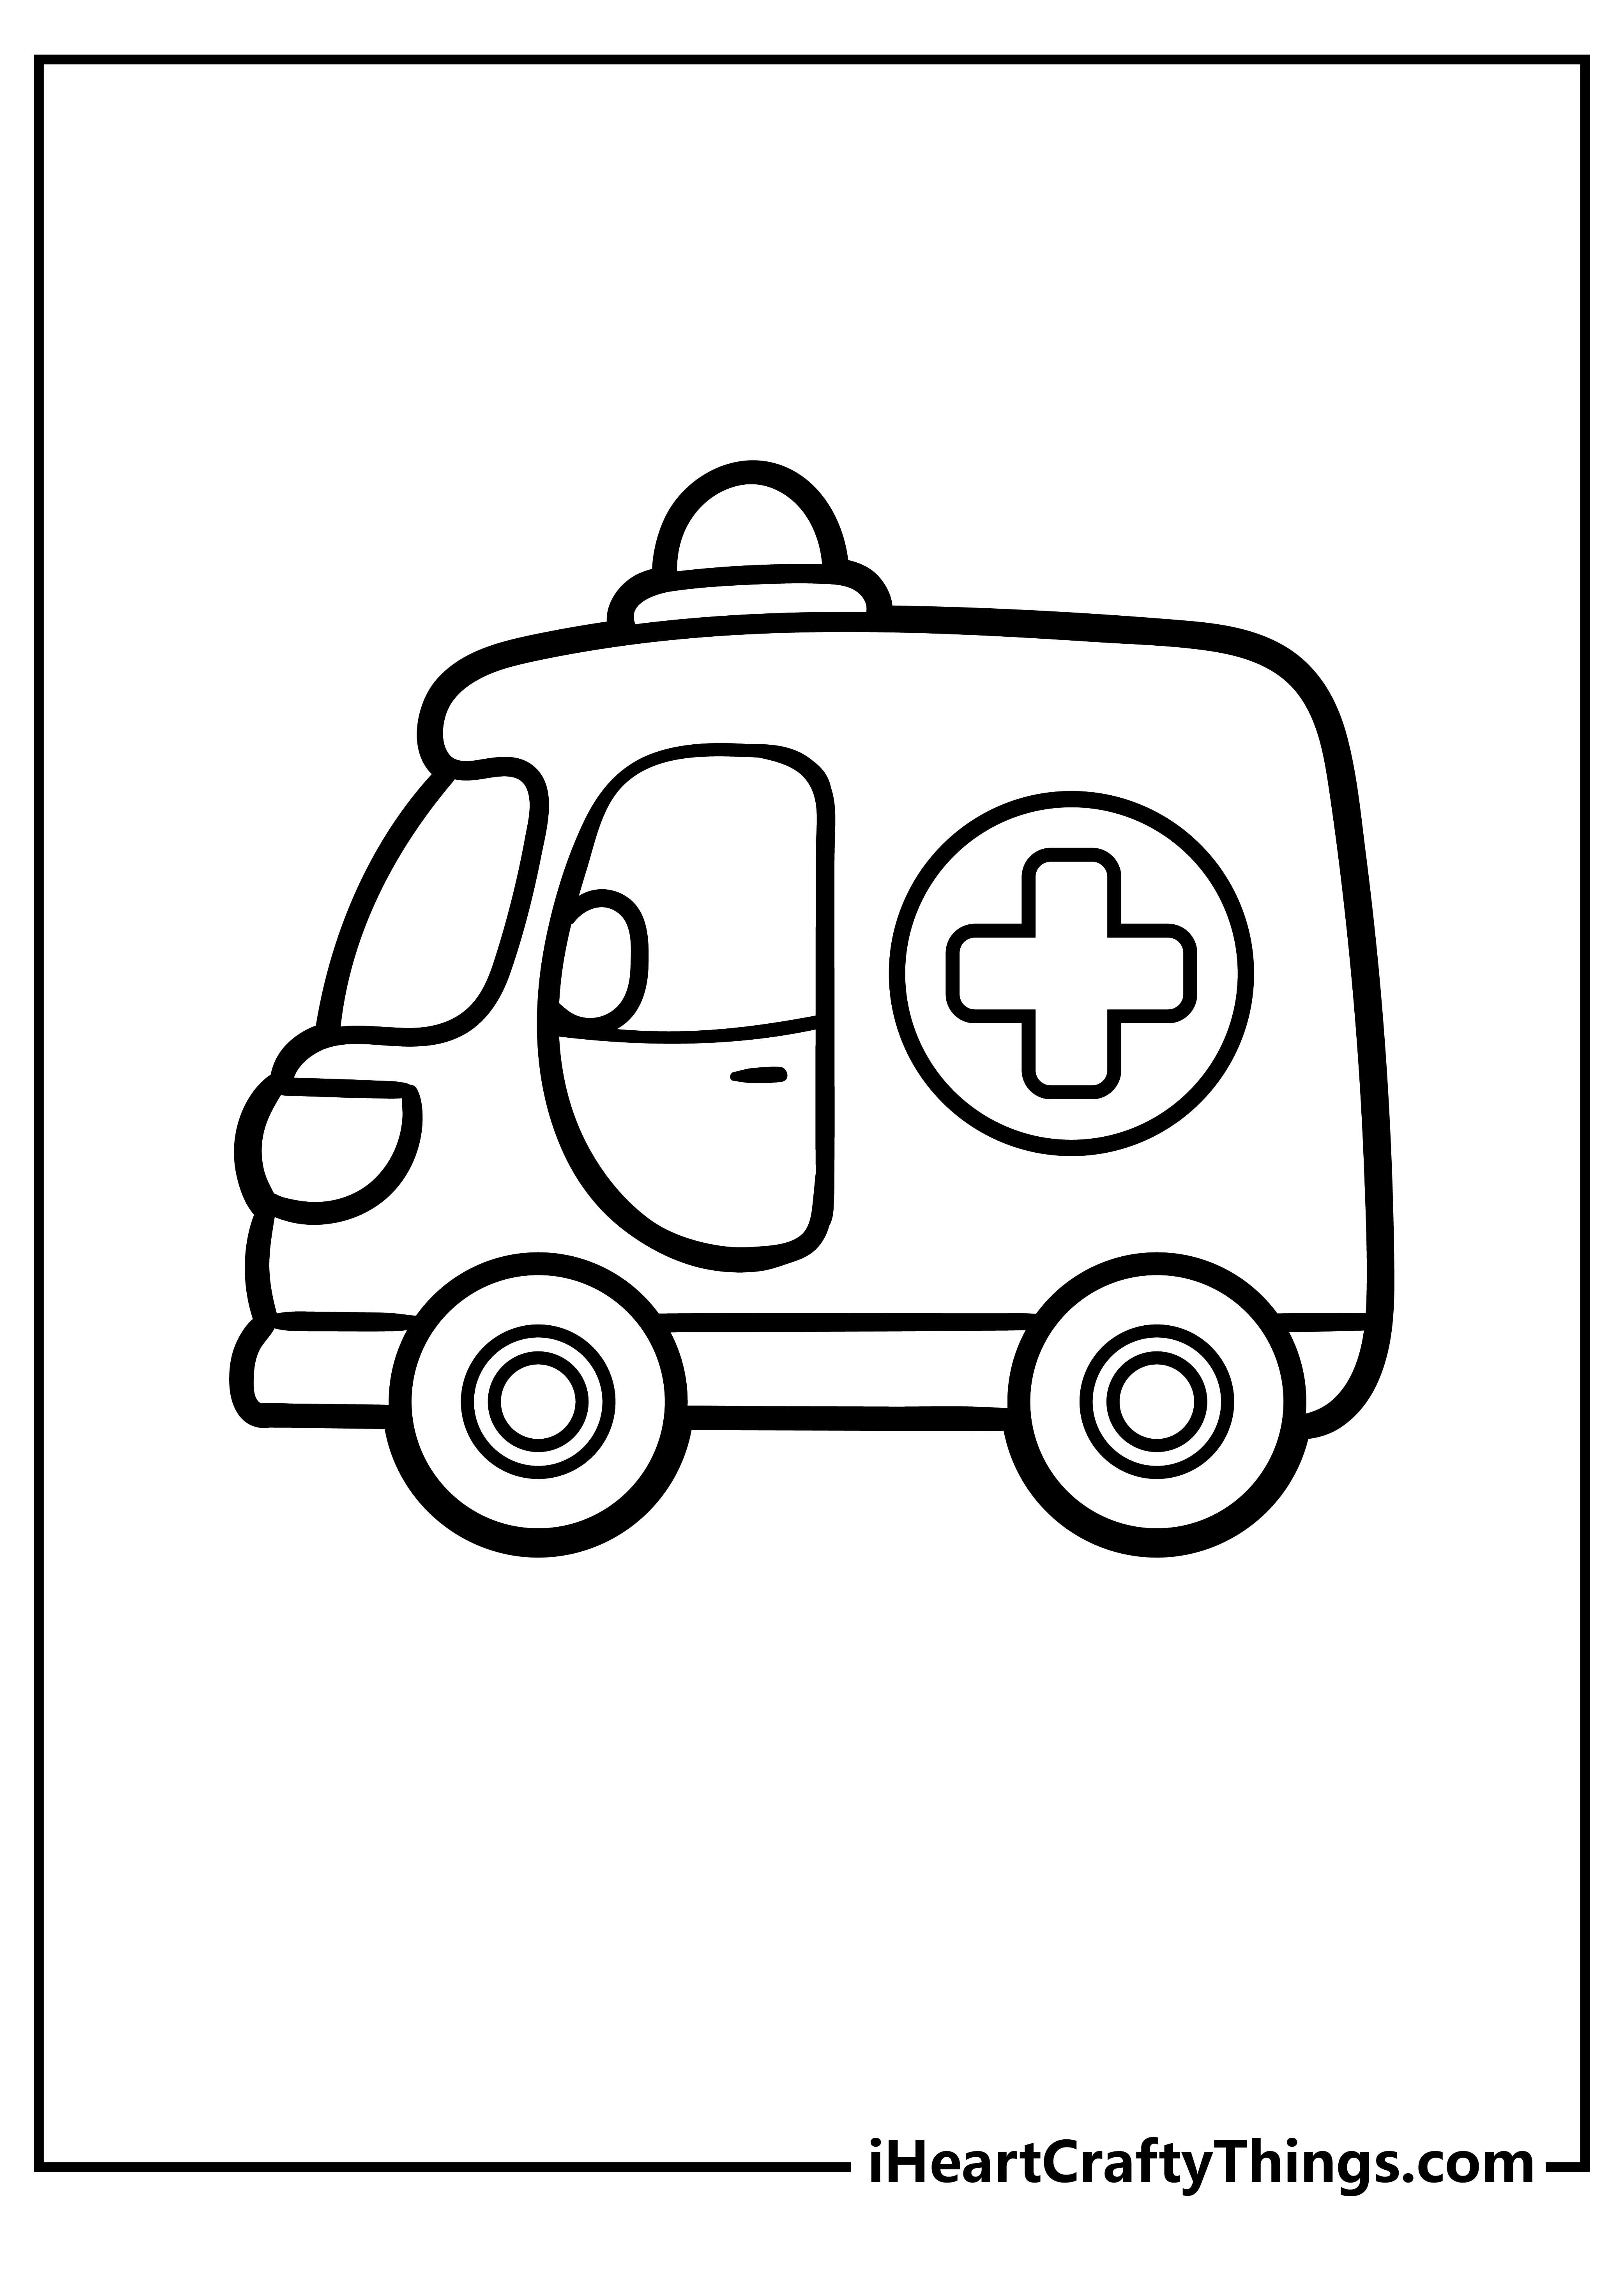 Ambulance Coloring Pages for preschoolers free printable